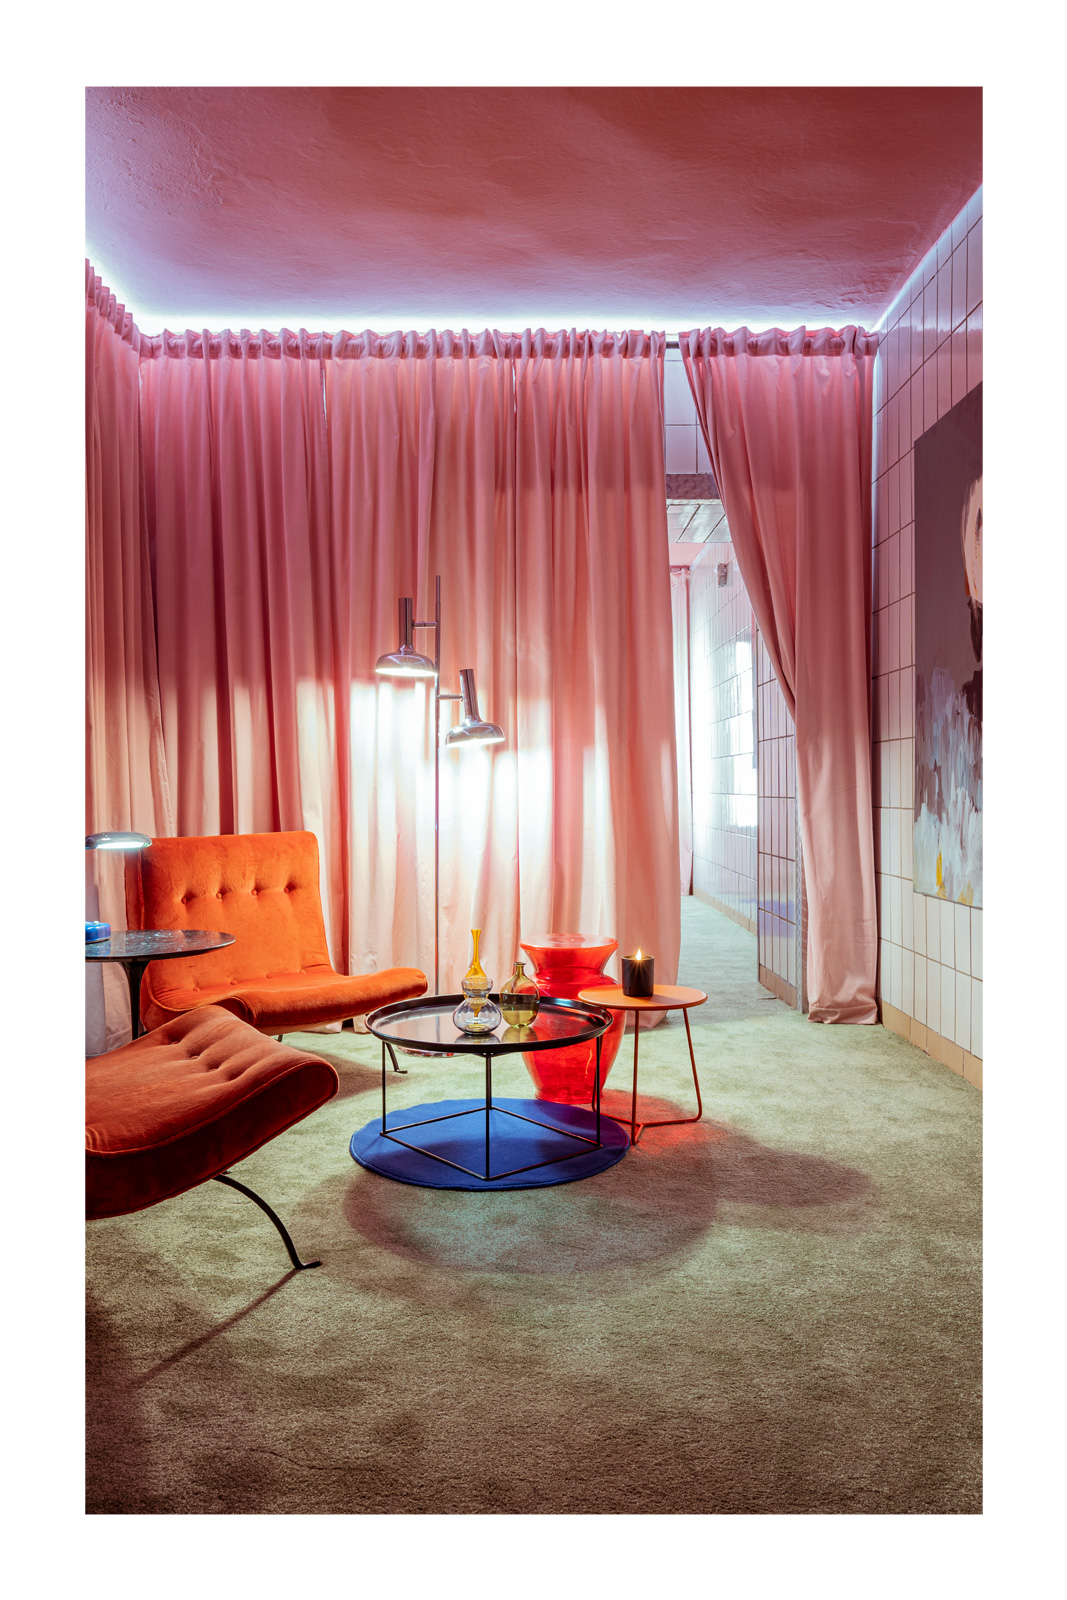 Set design and styling in Berlin